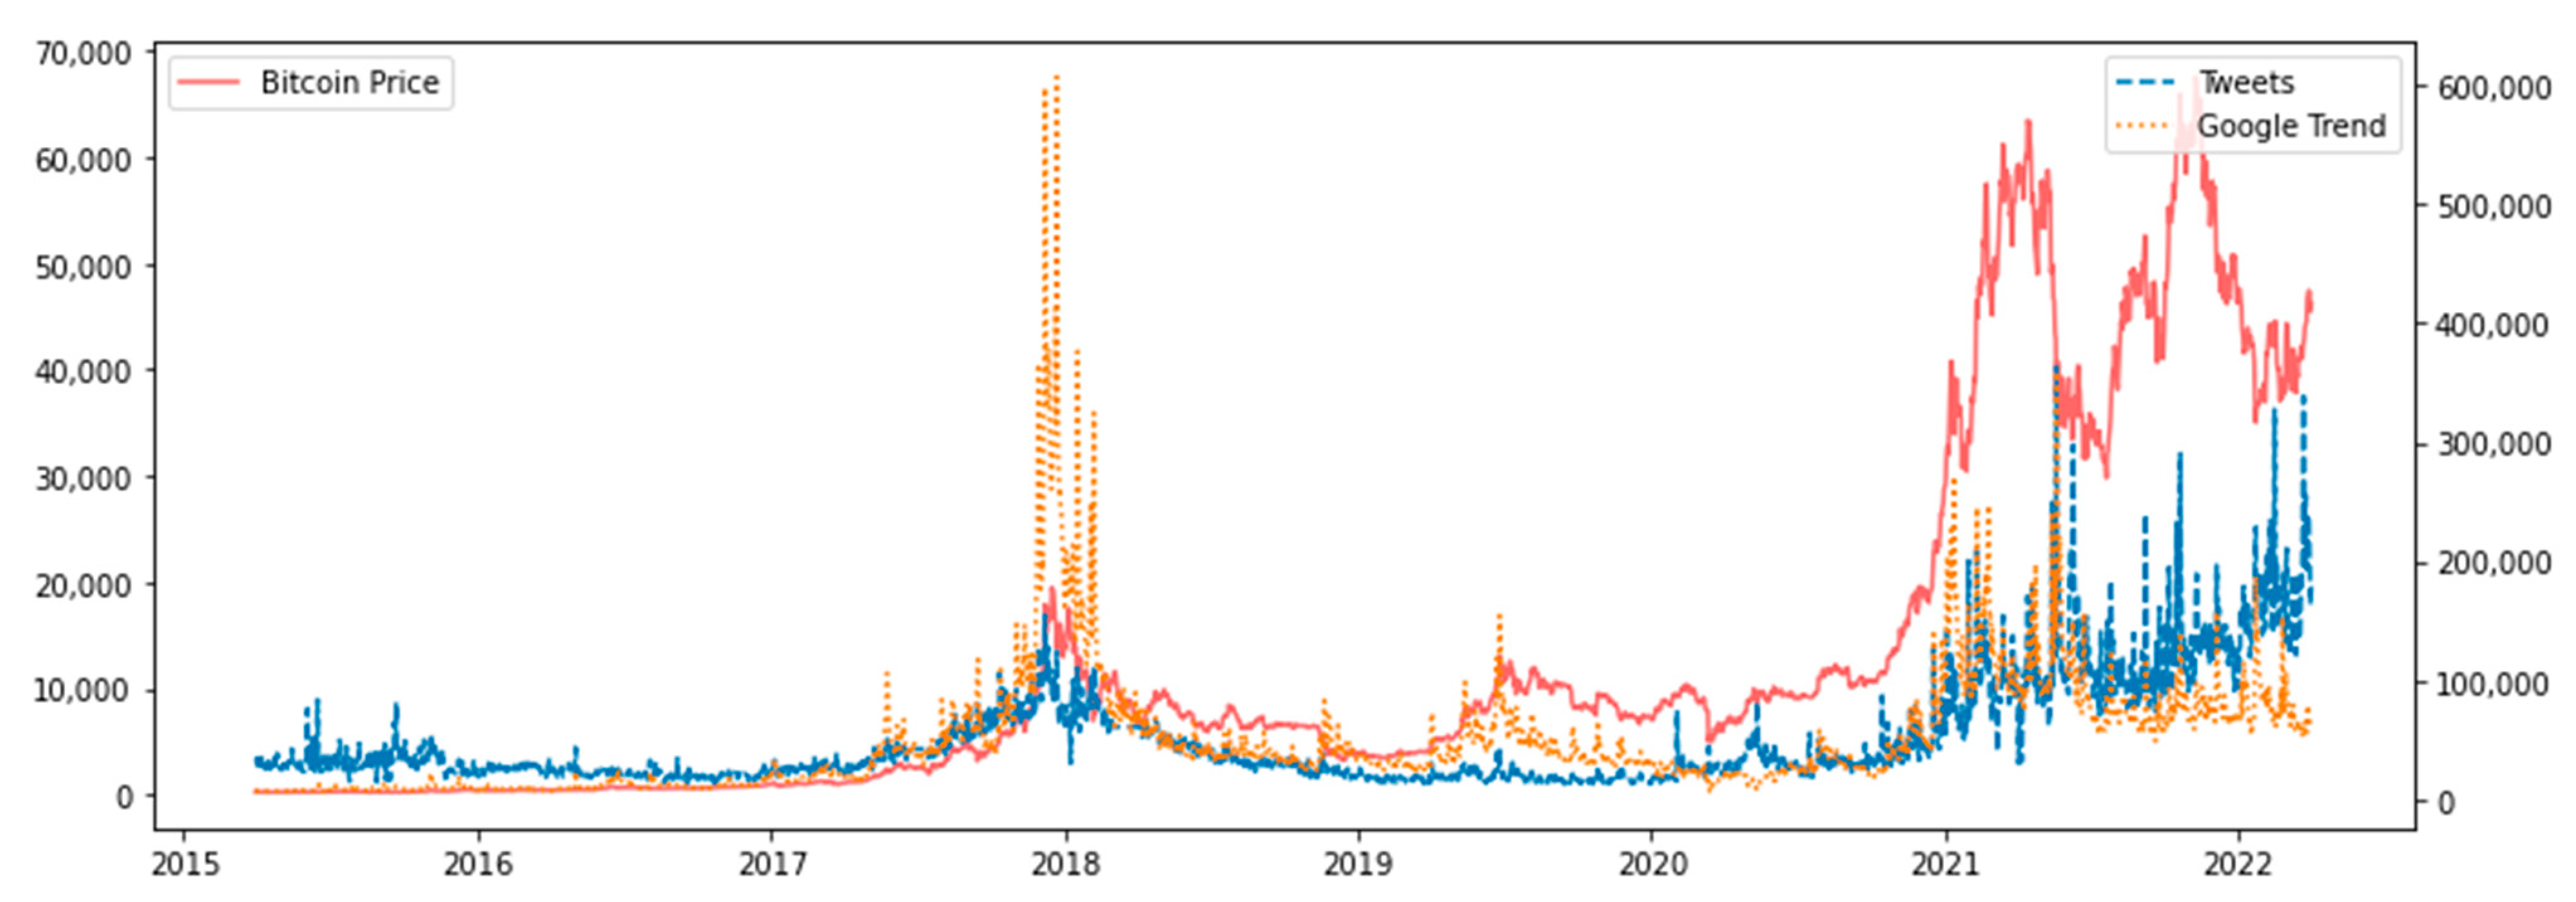 Trading Bitcoins and Online Time Series Prediction